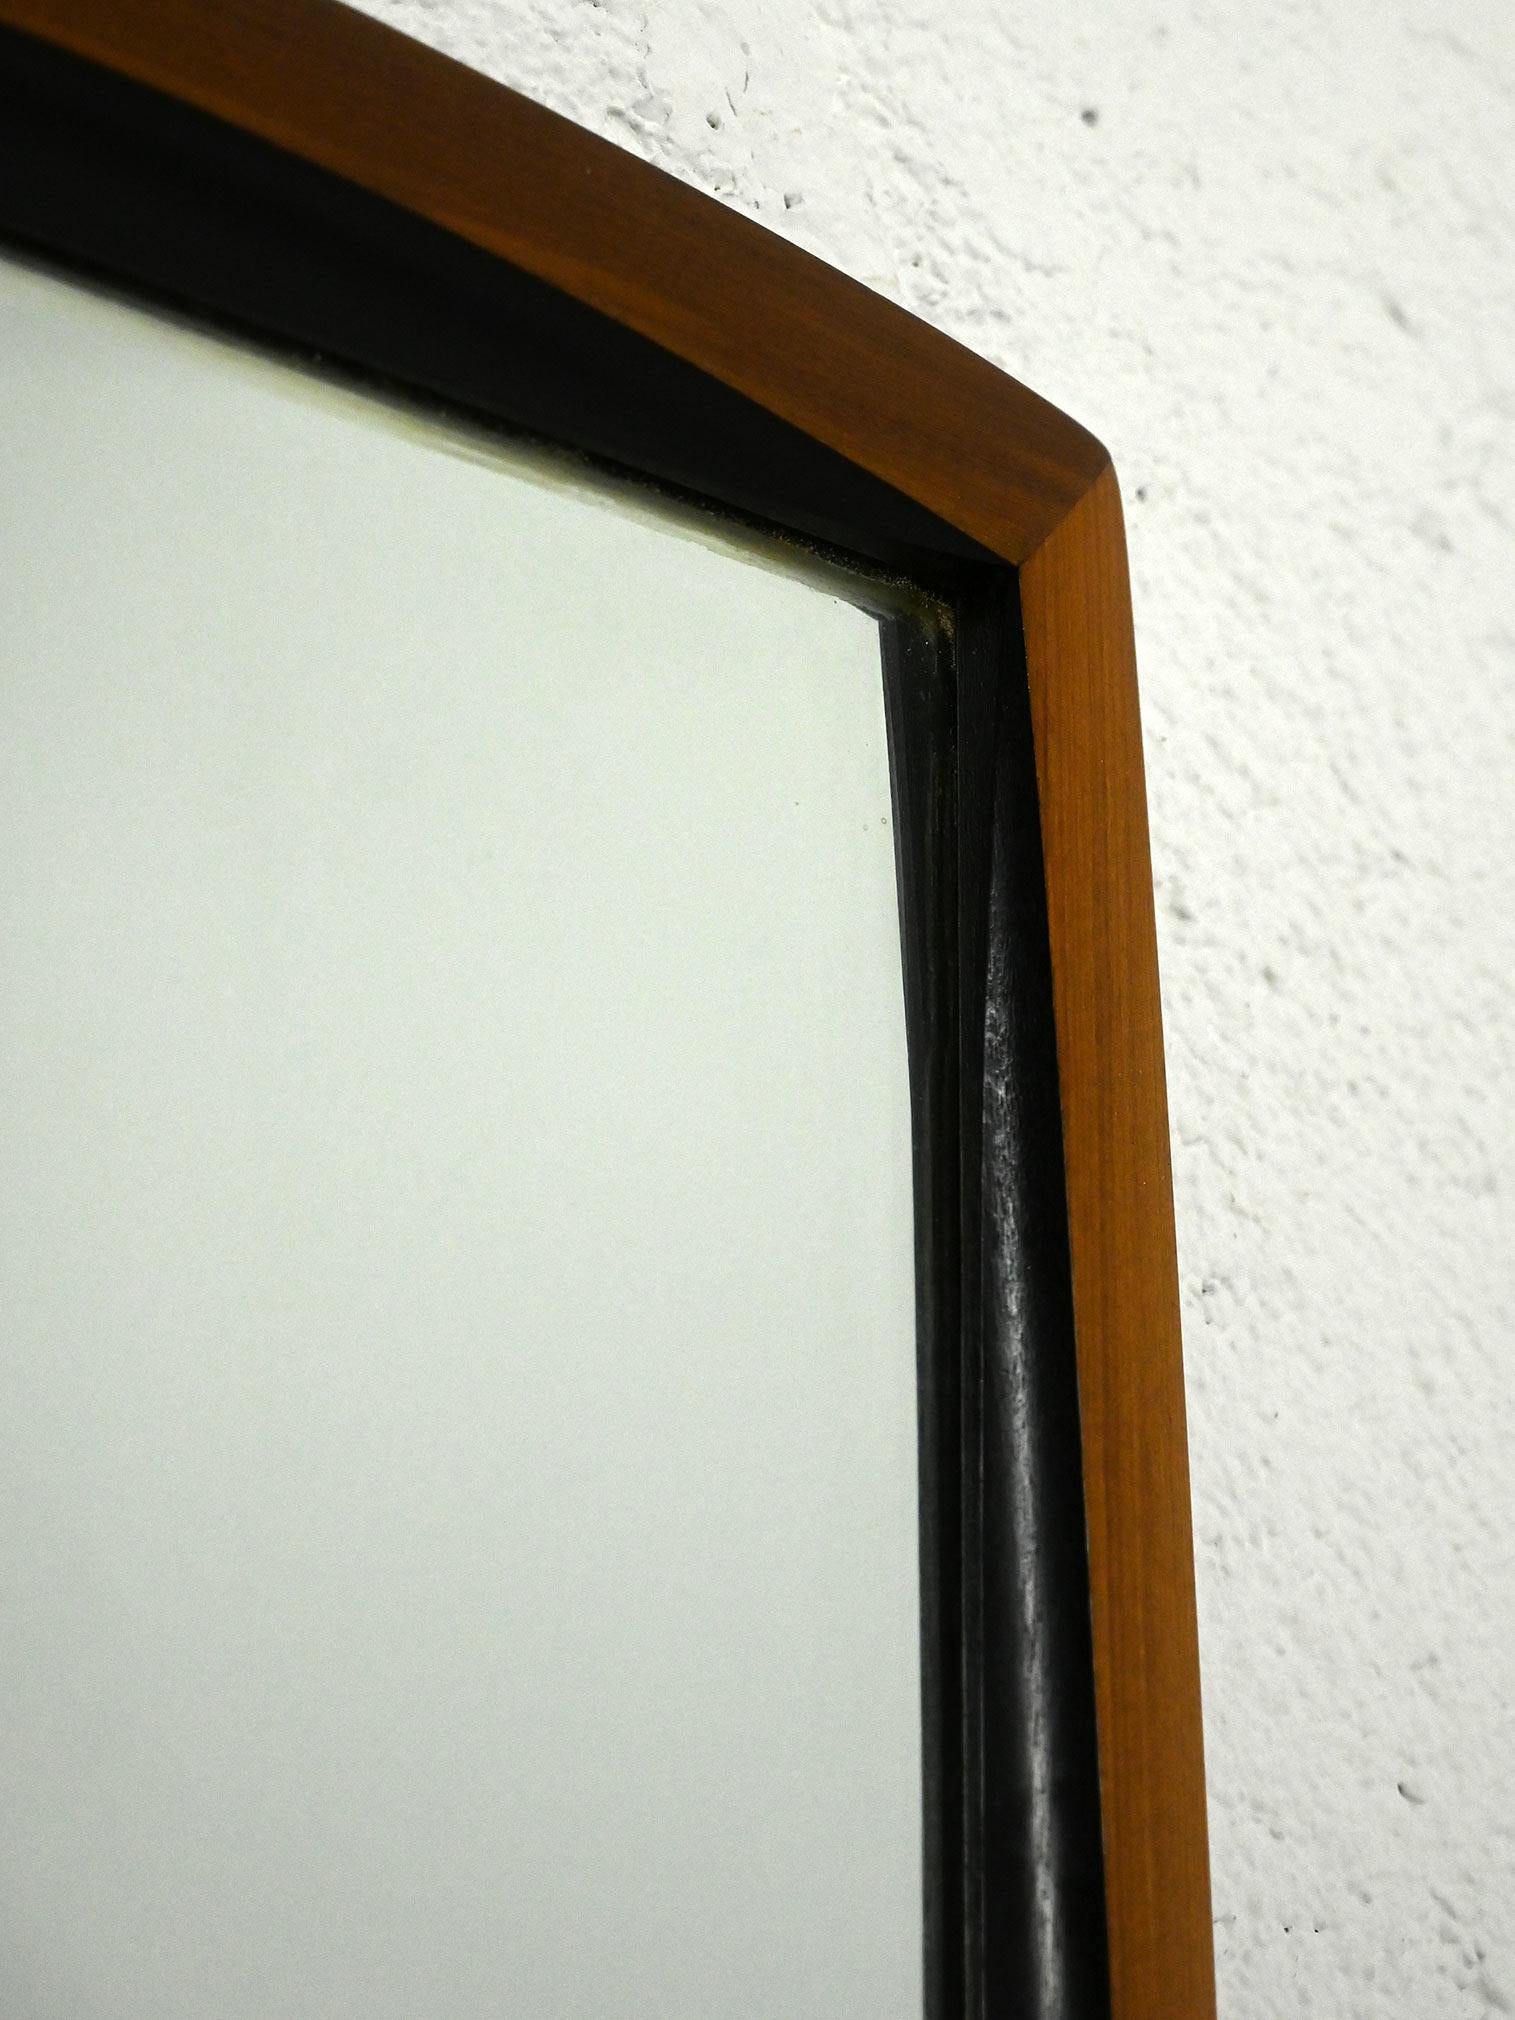 Mirror of original Scandinavian manufacture from the 1960s.

Vintage mirror with thick, slightly protruding frame with a dark brown color. A distinctive detail is the black outline around the mirror, which accentuates the elegance of the